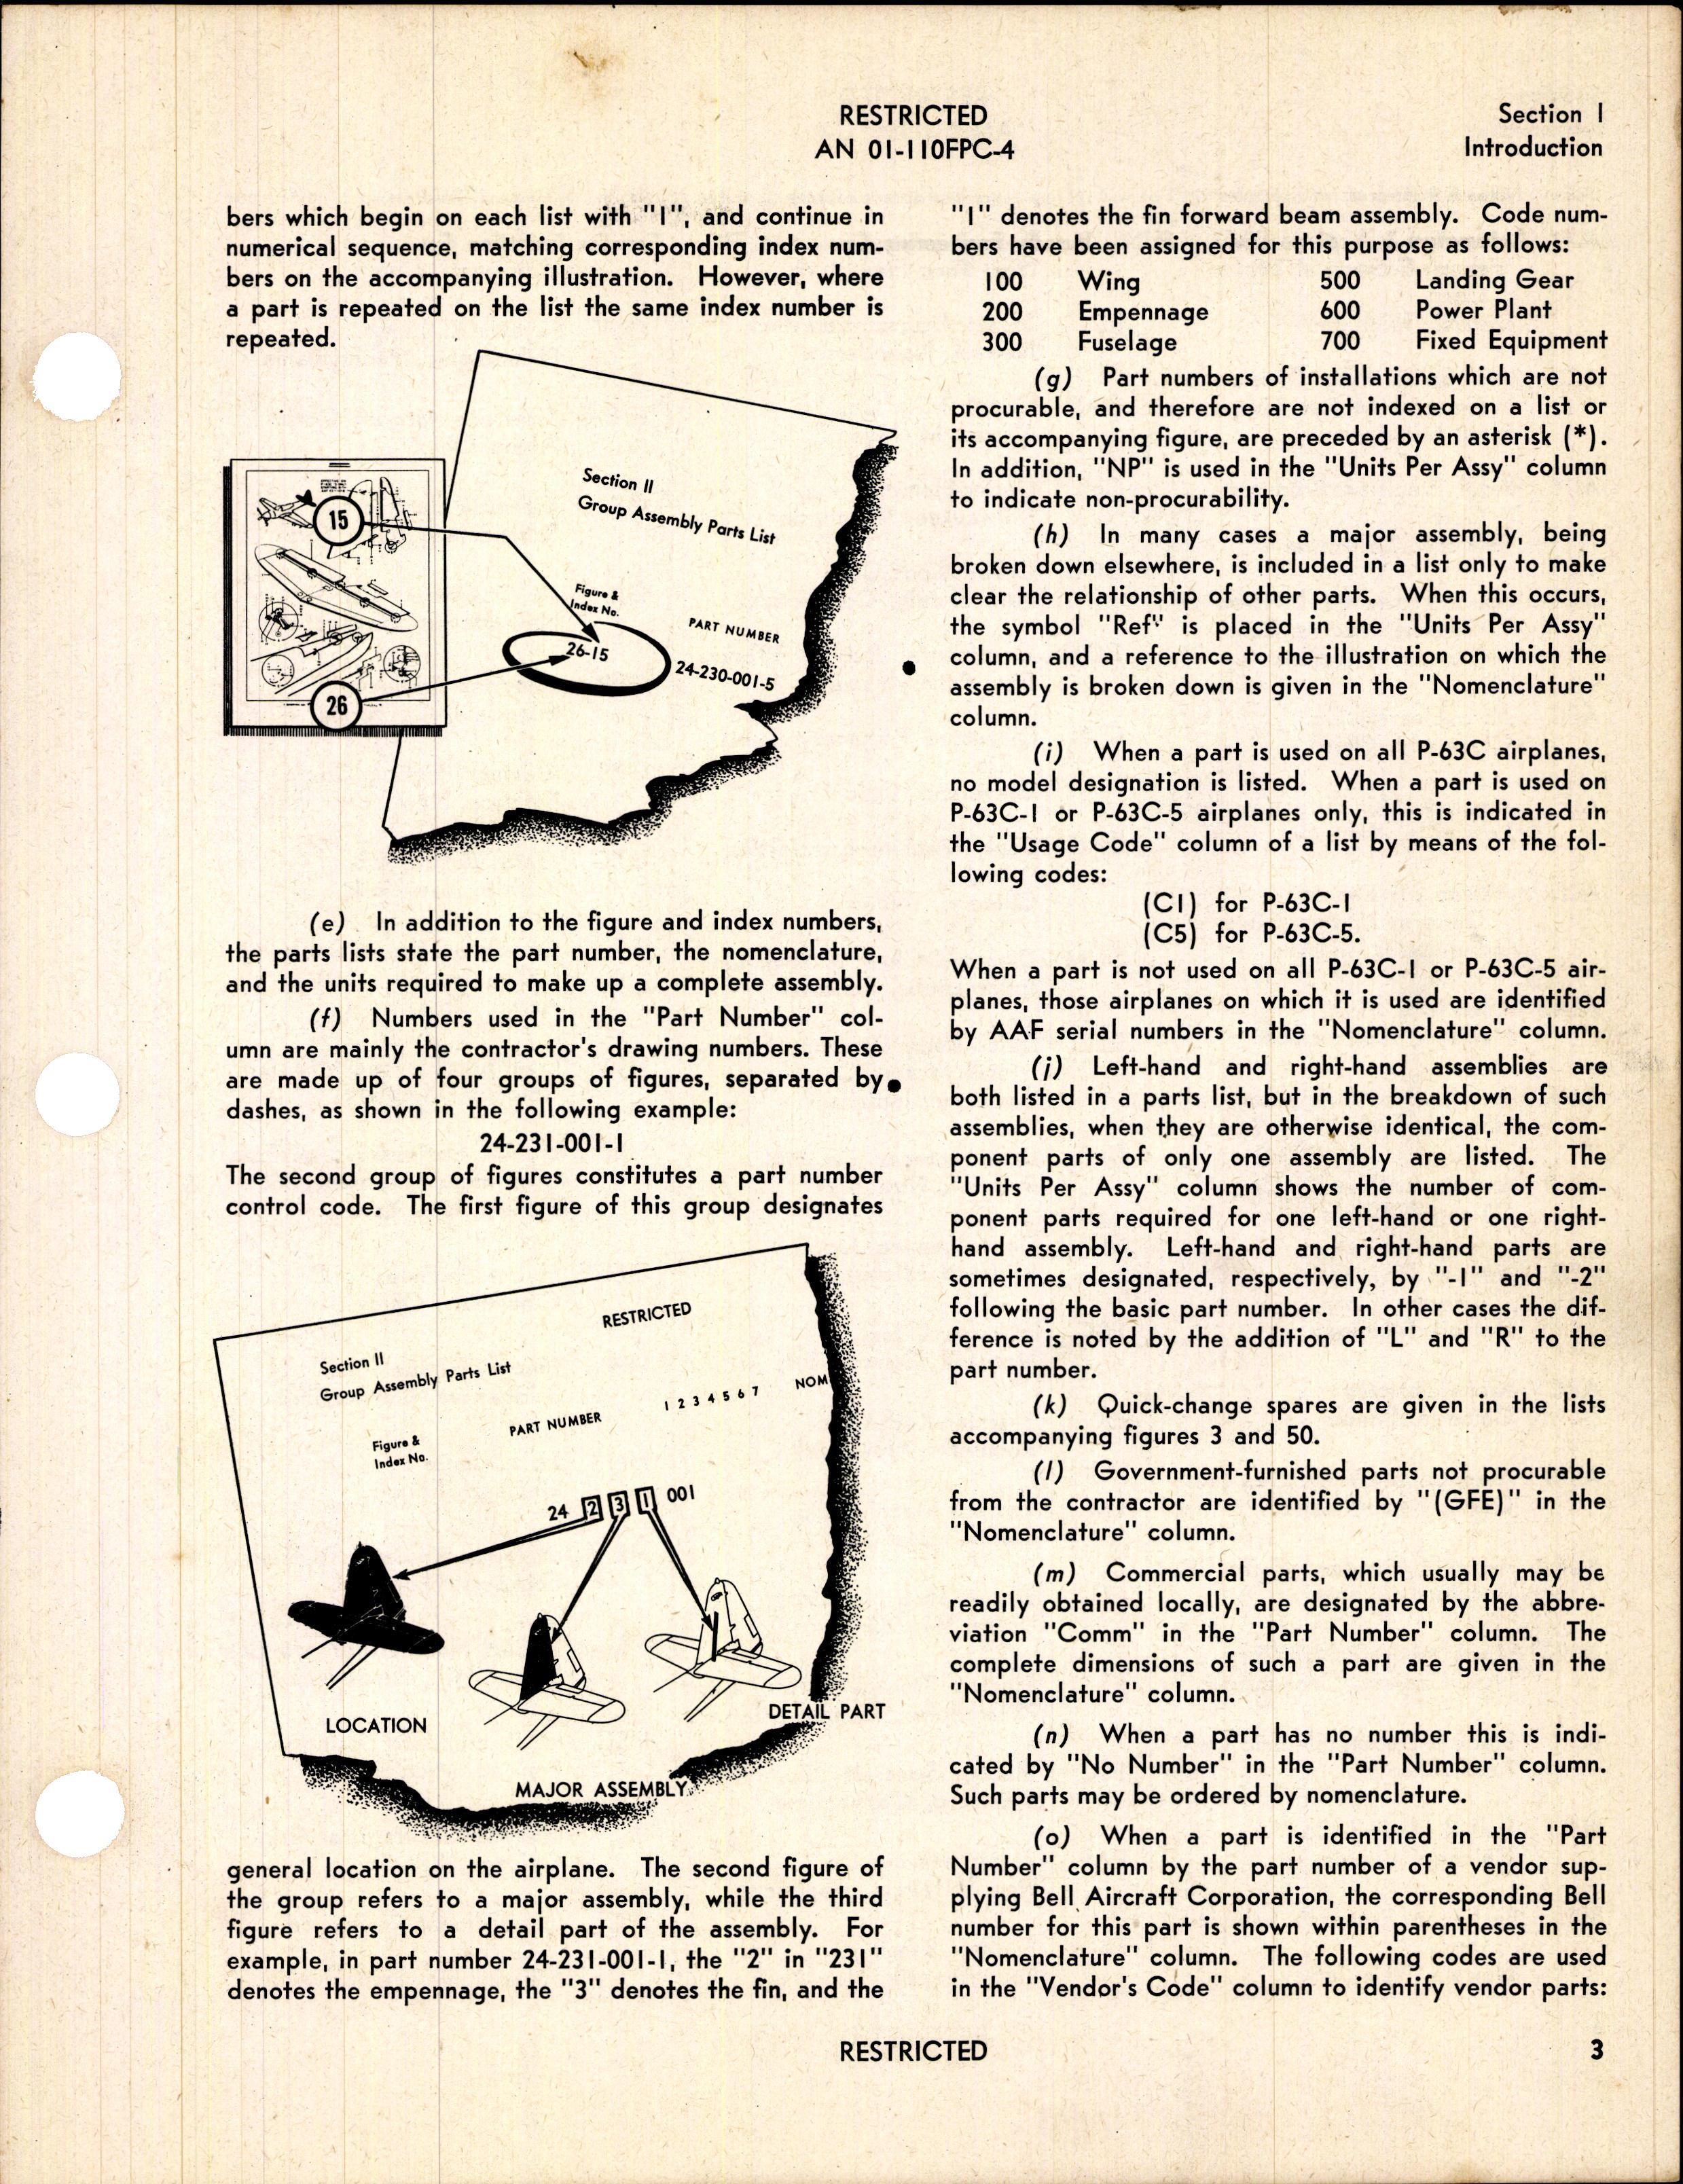 Sample page 7 from AirCorps Library document: Parts Catalog for P-63C-1 and P-63C-5